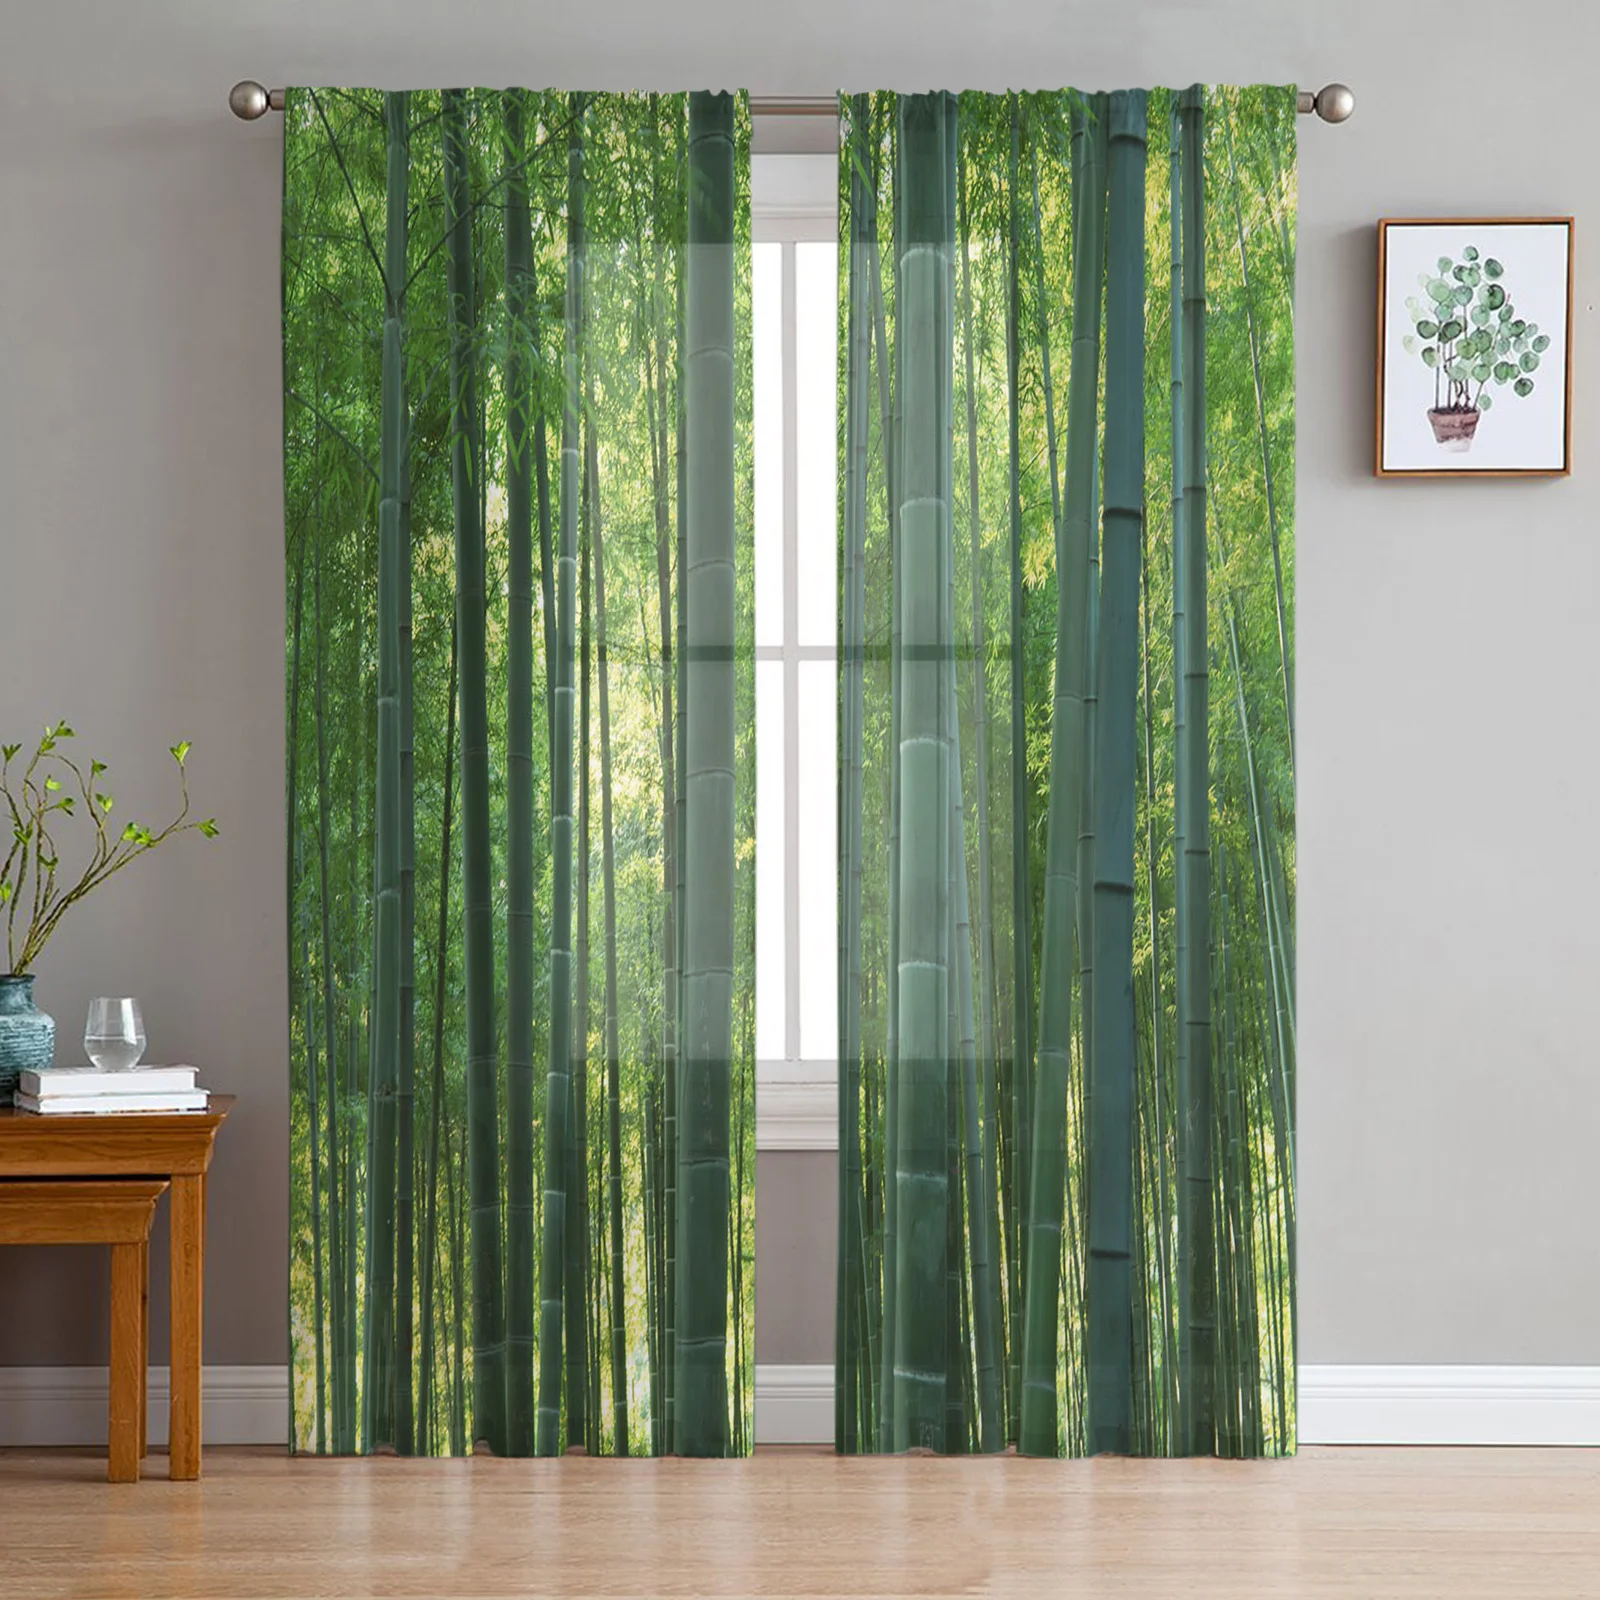 Indoor Tulle Curtains Bamboo Forest Green Girls Bedroom Exquisite Voile Curtain Living Room Kitchen Chiffon Fabric Curtains